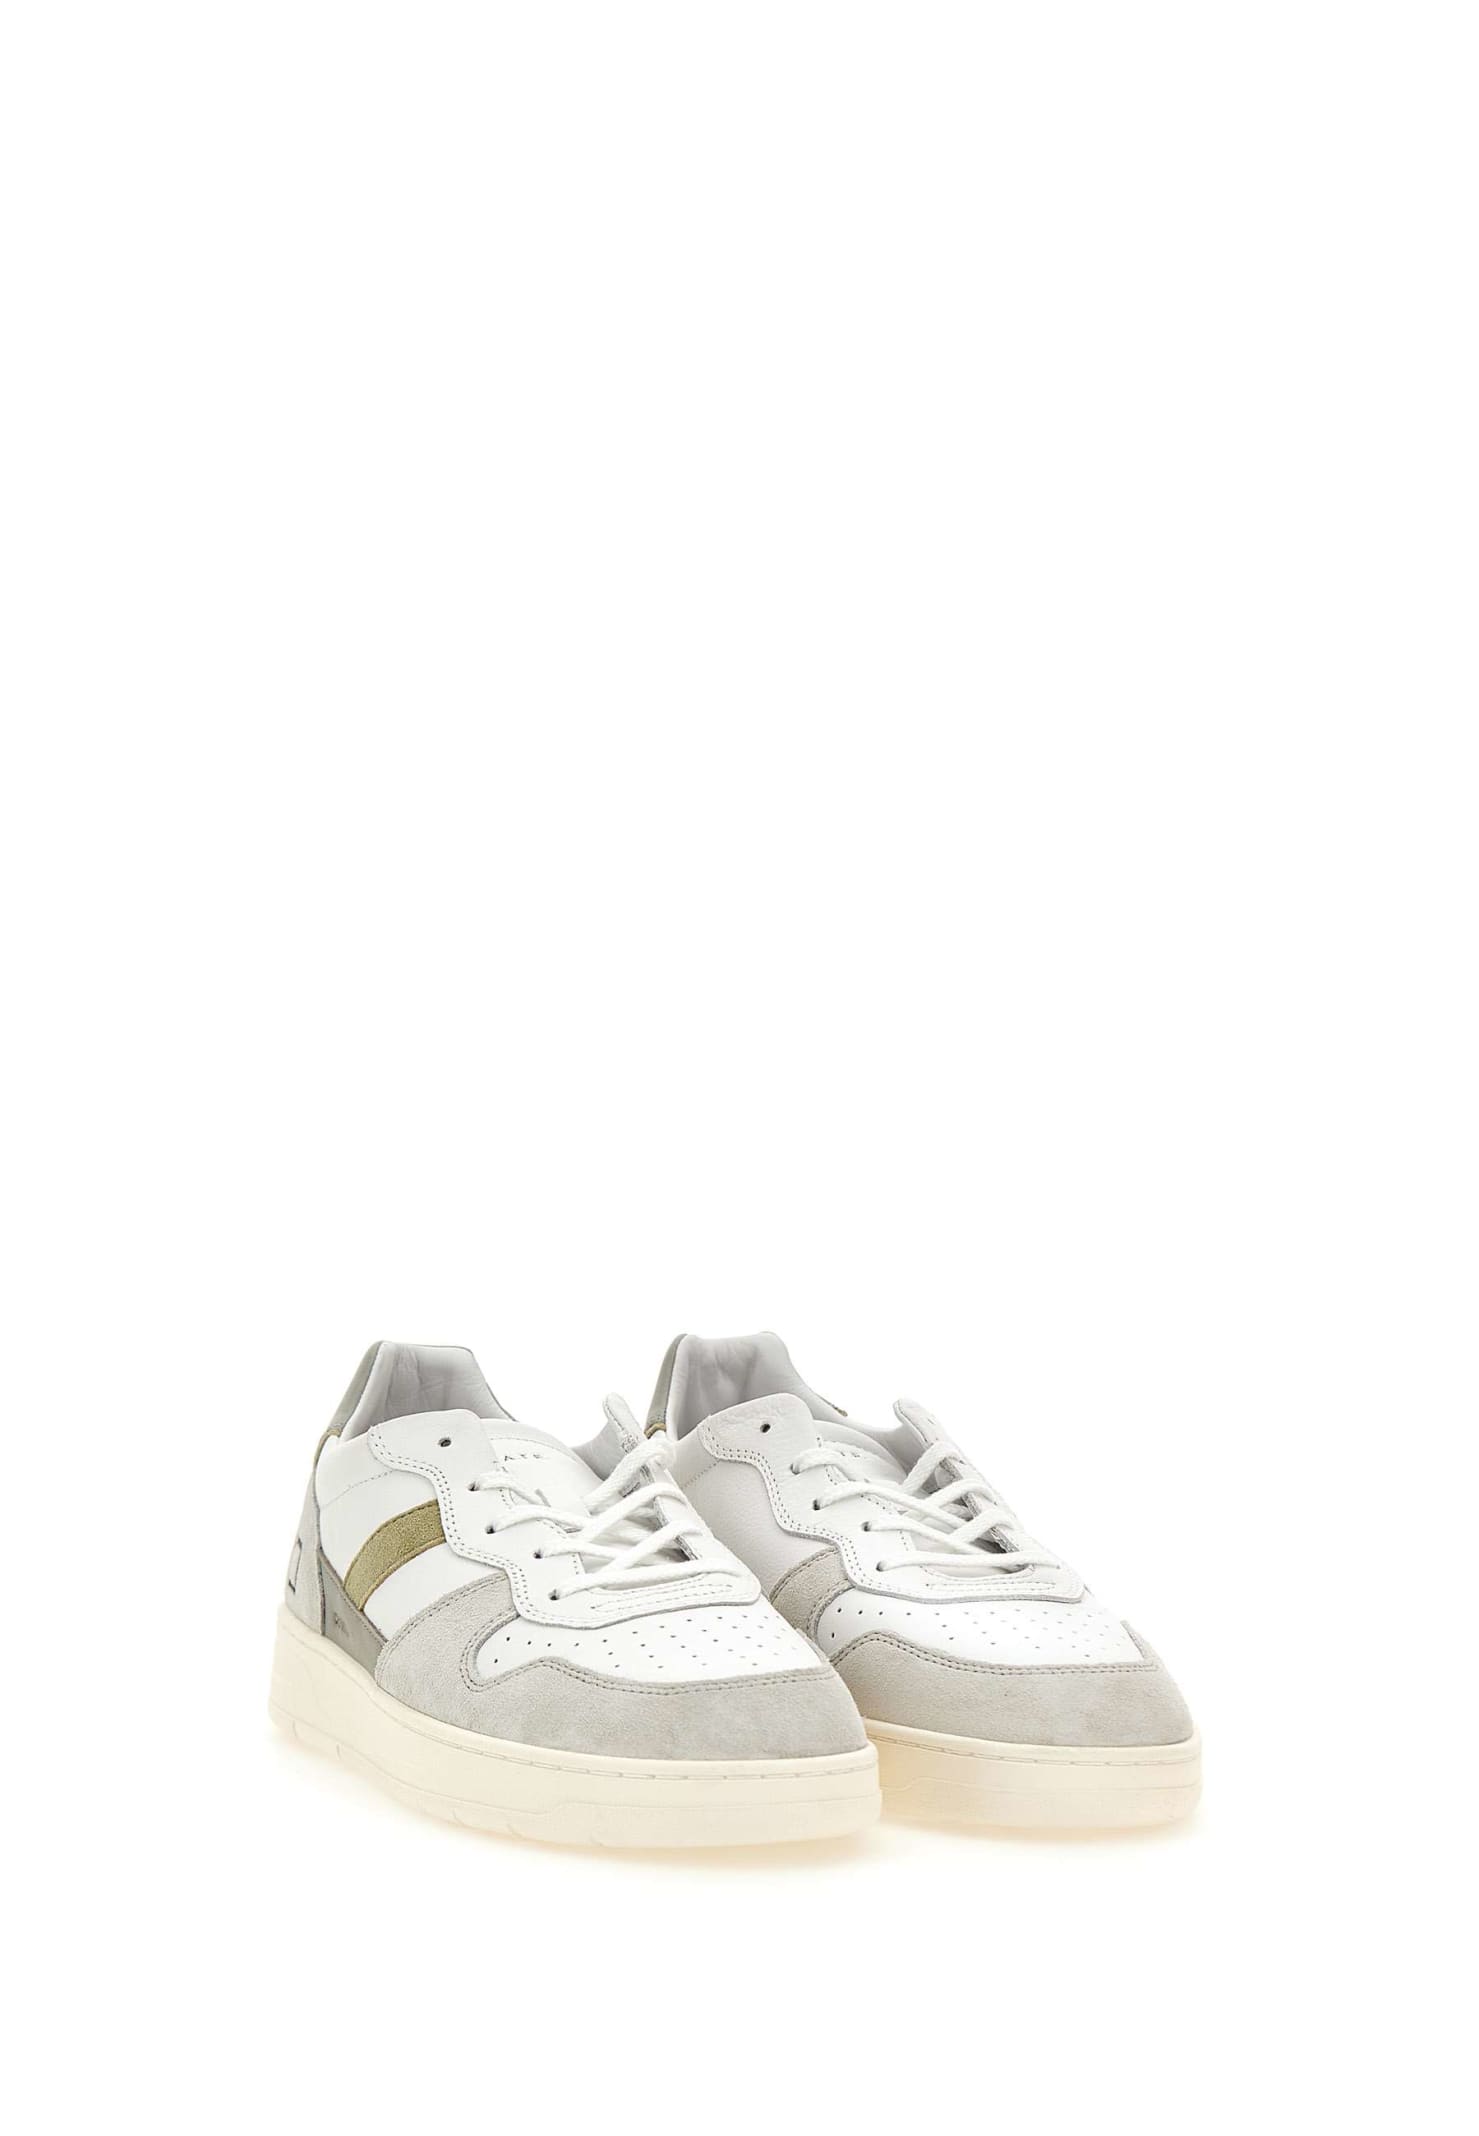 Shop Date Court 2.0 Vintage Leather Sneakers In White